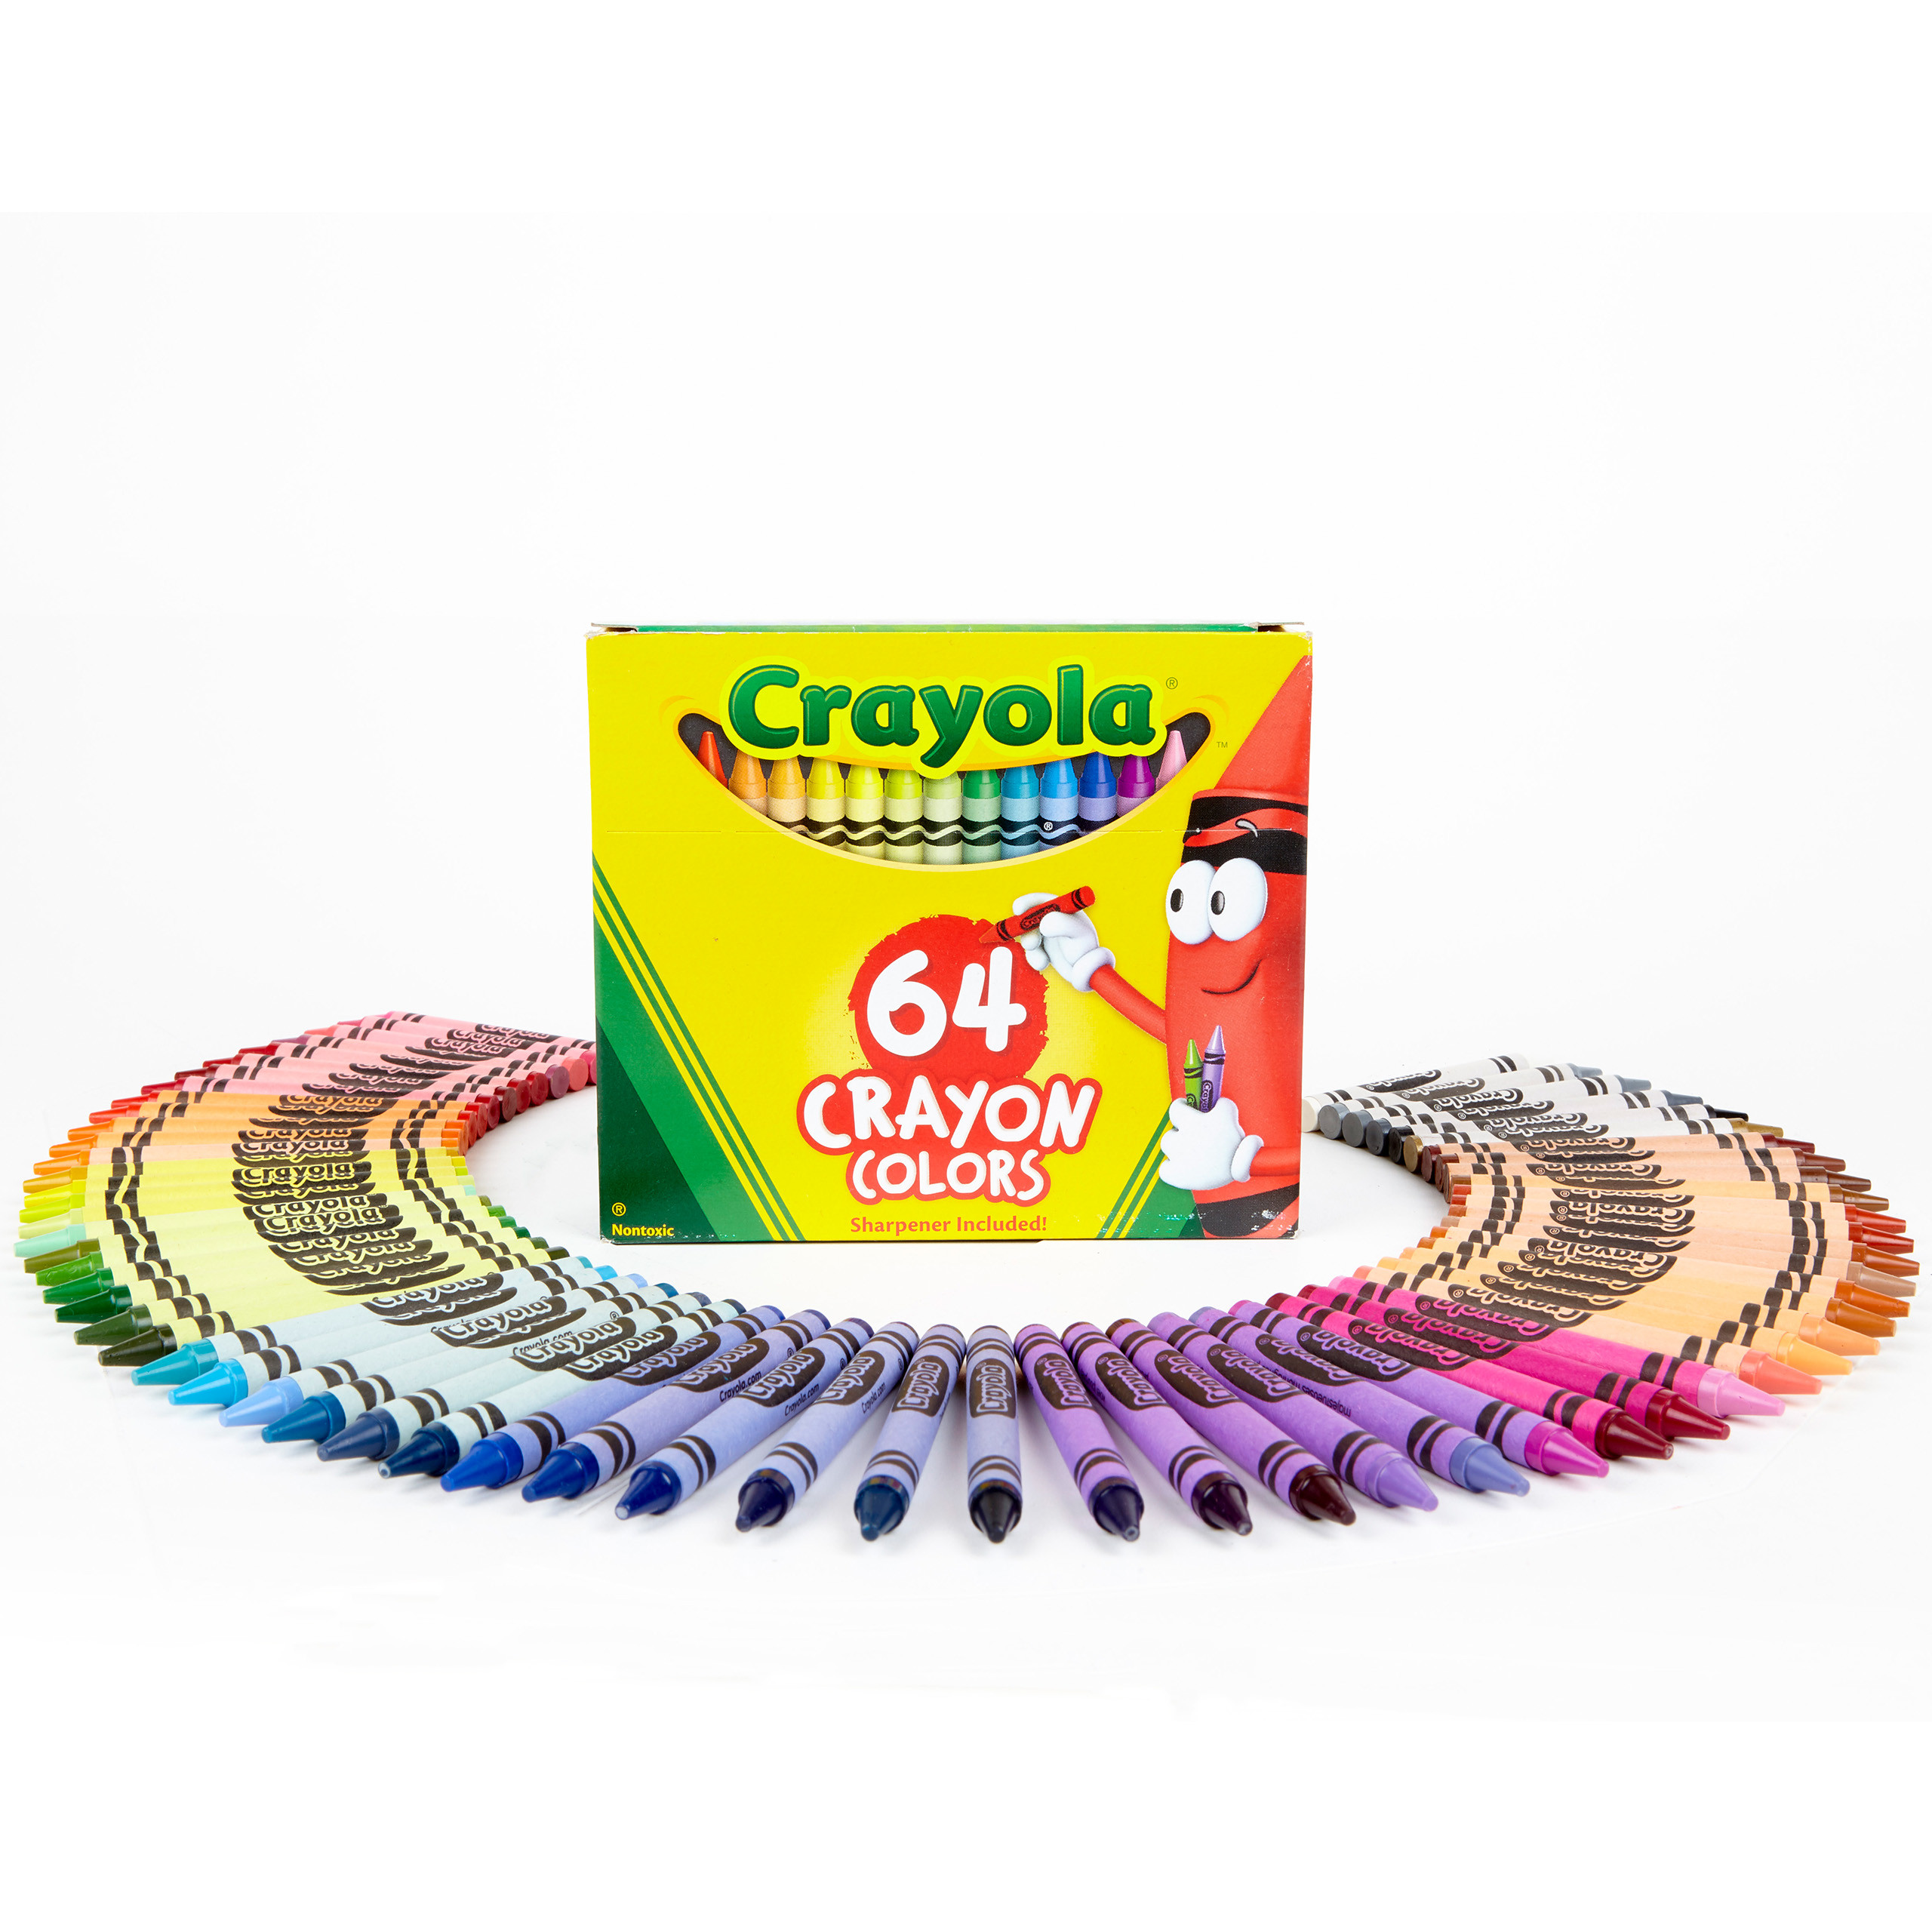 Crayola Crayons, 64 Ct, Back to School Supplies for Kids, Teacher Supplies, Gift - image 3 of 10